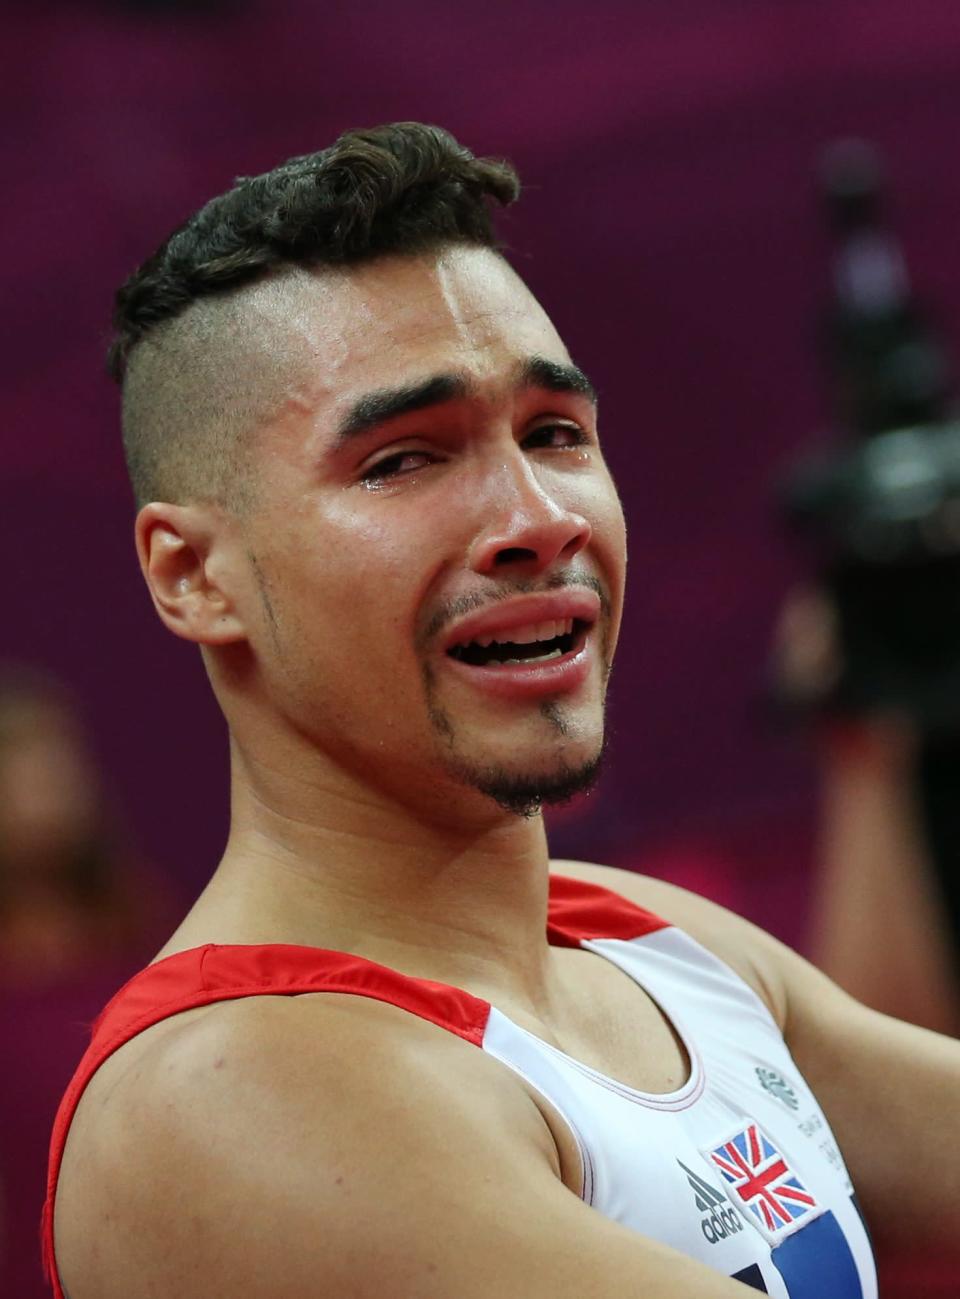 Britain's Louis Smith cries at the London 2012 Olympic Games Artistic Gymnastics competition in London, Britain, 28 July 2012. EPA/Rolf Vennenbernd